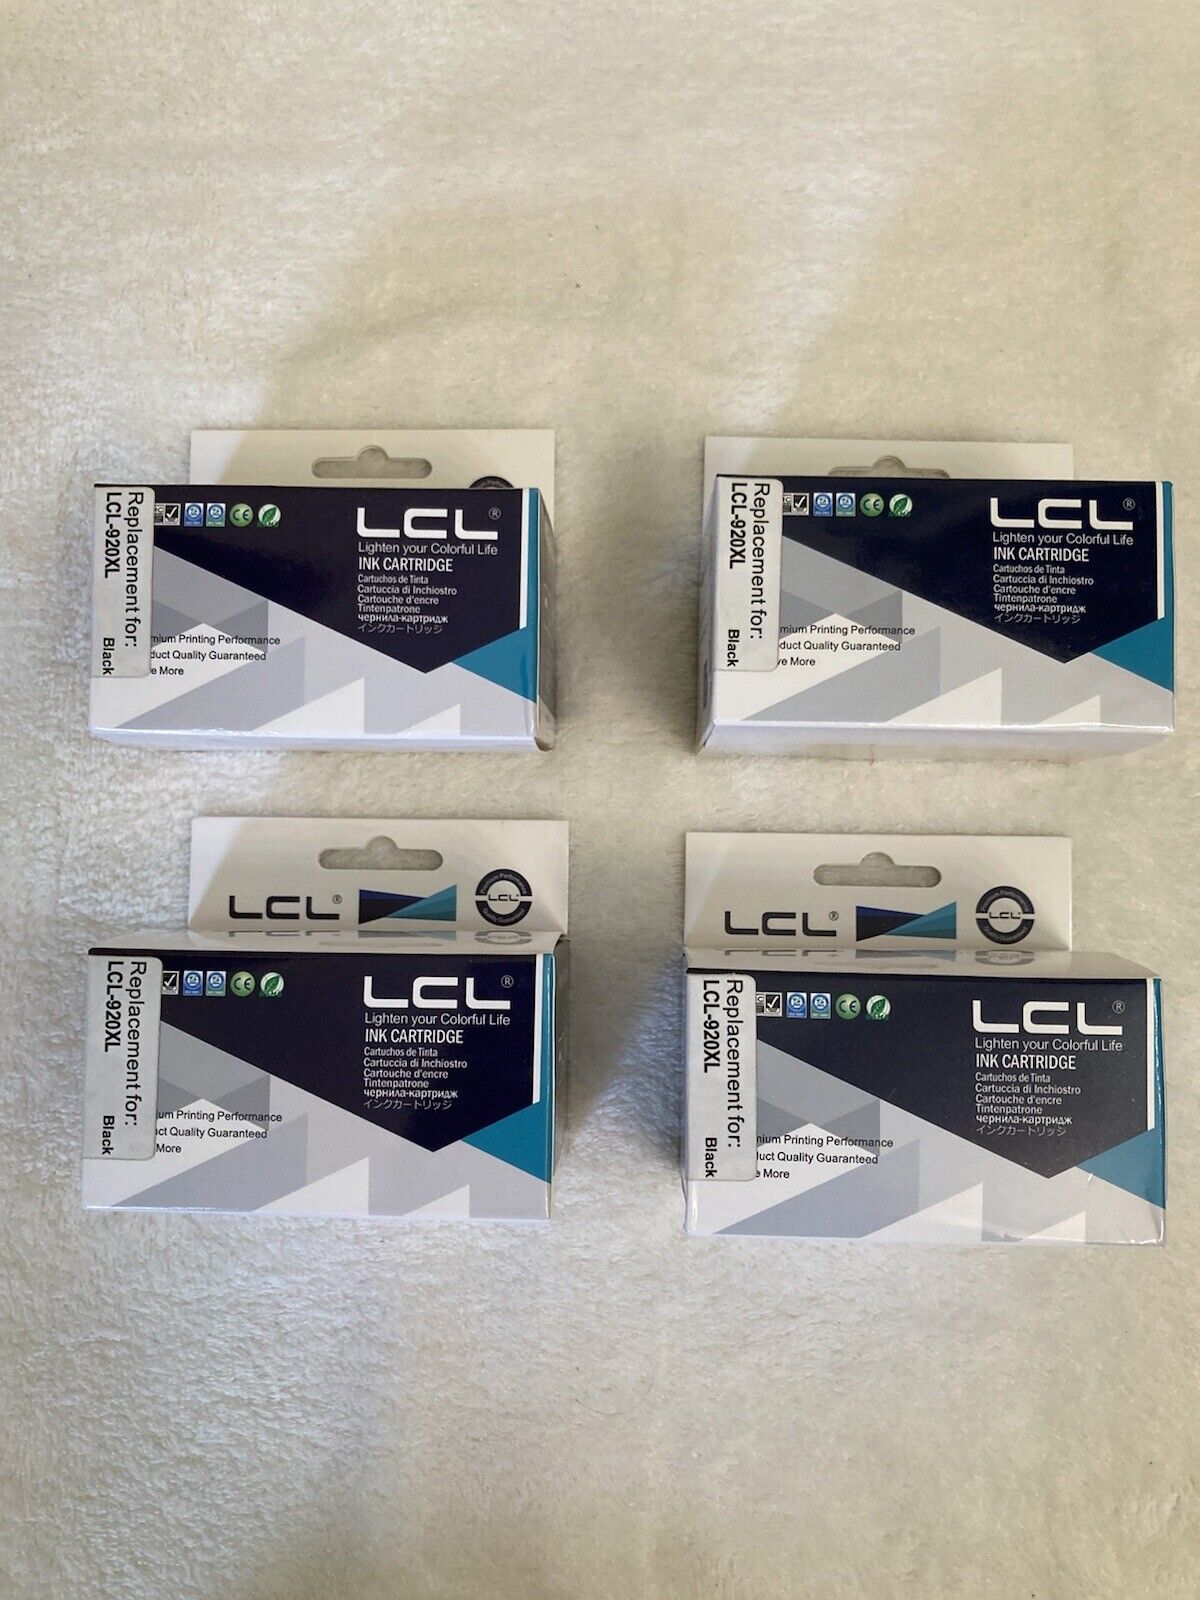  Lot of 4 Printer Ink Cartridges Replacement for LCL 920XL Black